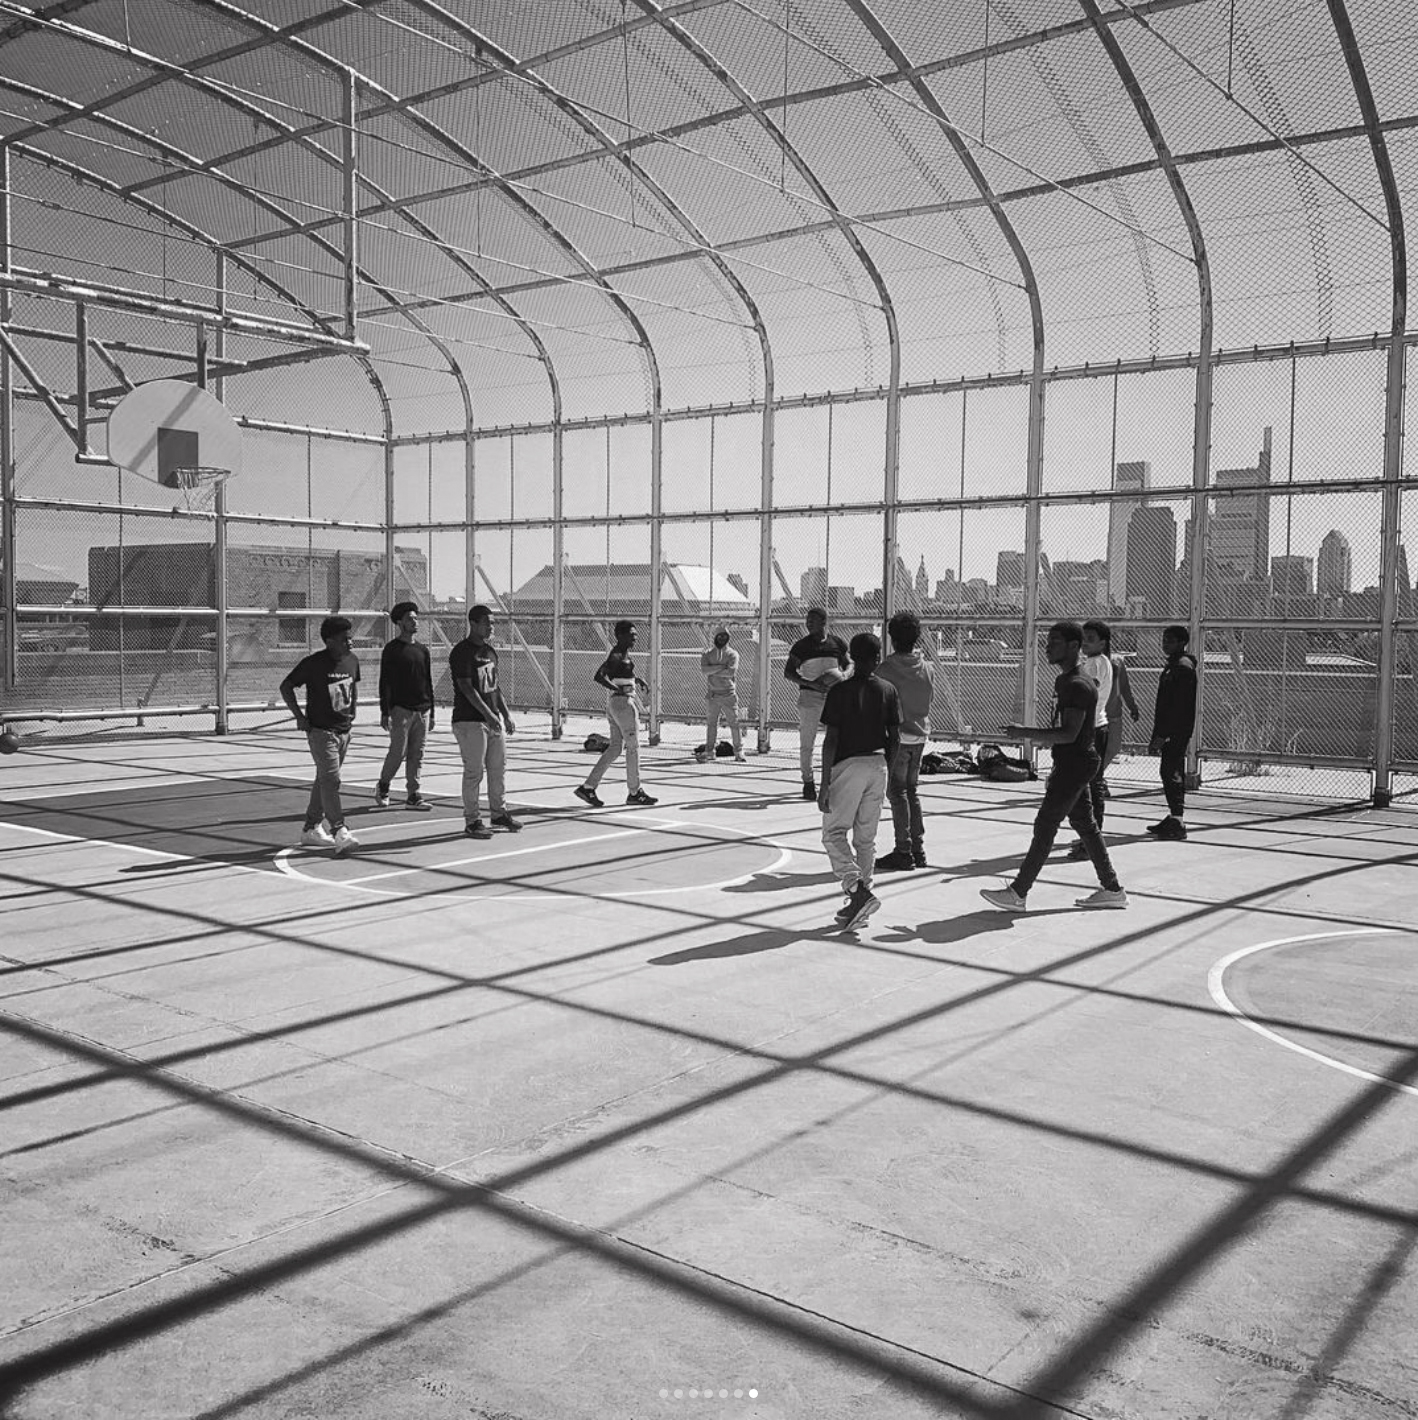 Reference site: Vaux Big Picture High School, Rooftop Basketball Court.